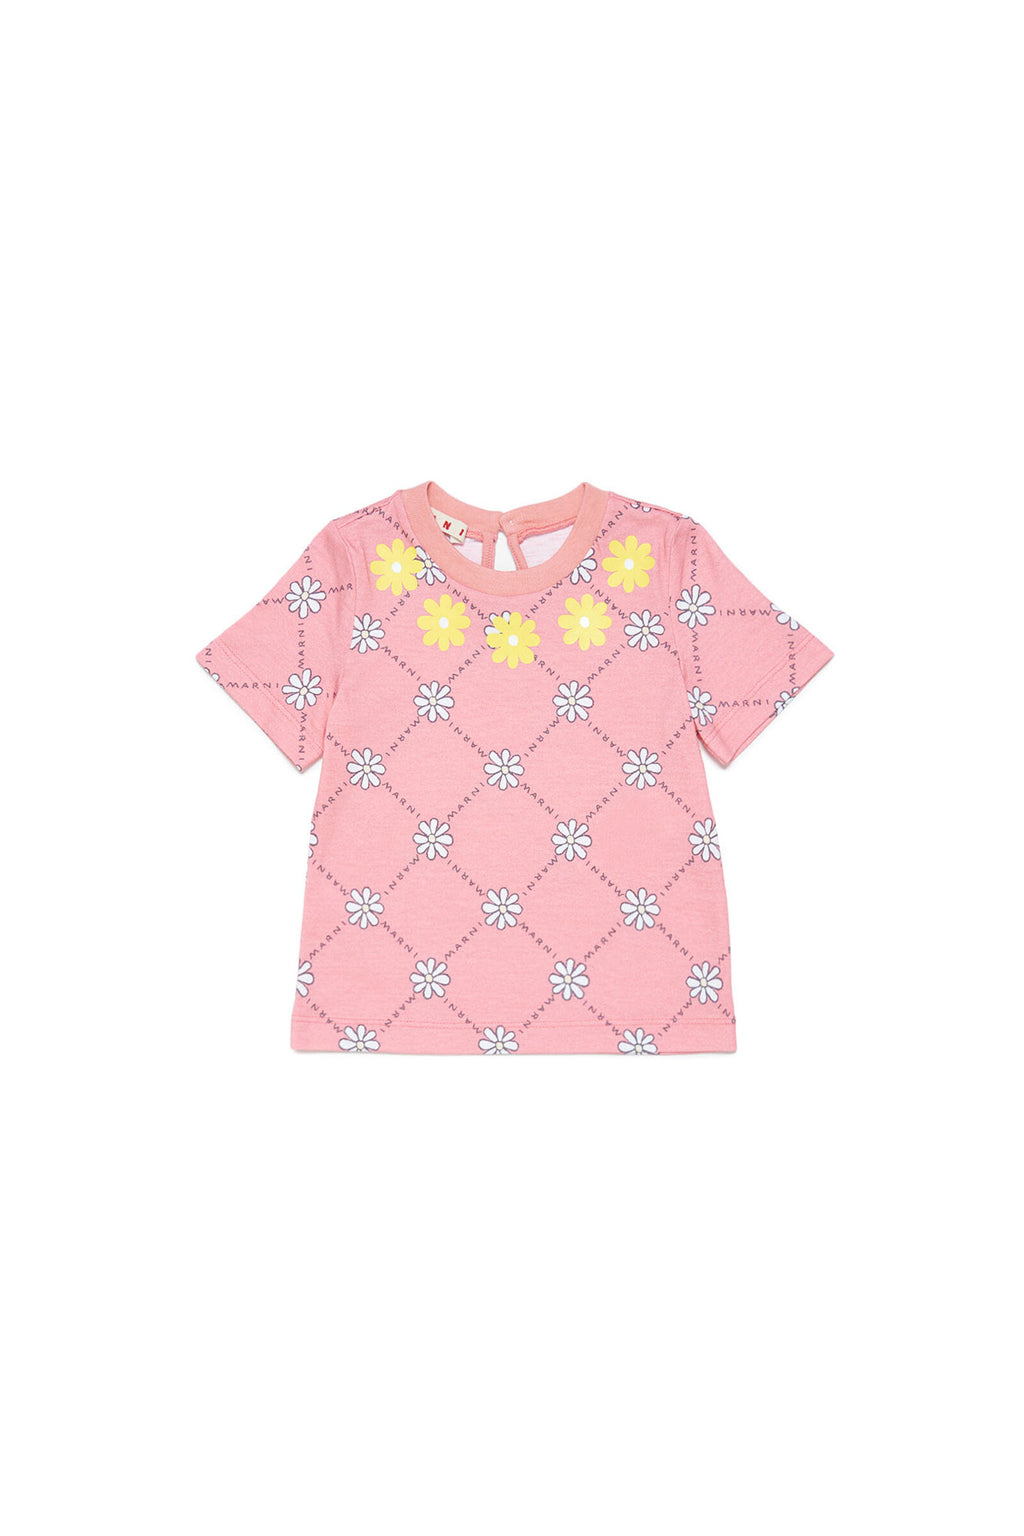 Peach pink cotton t-shirt with daisy pattern